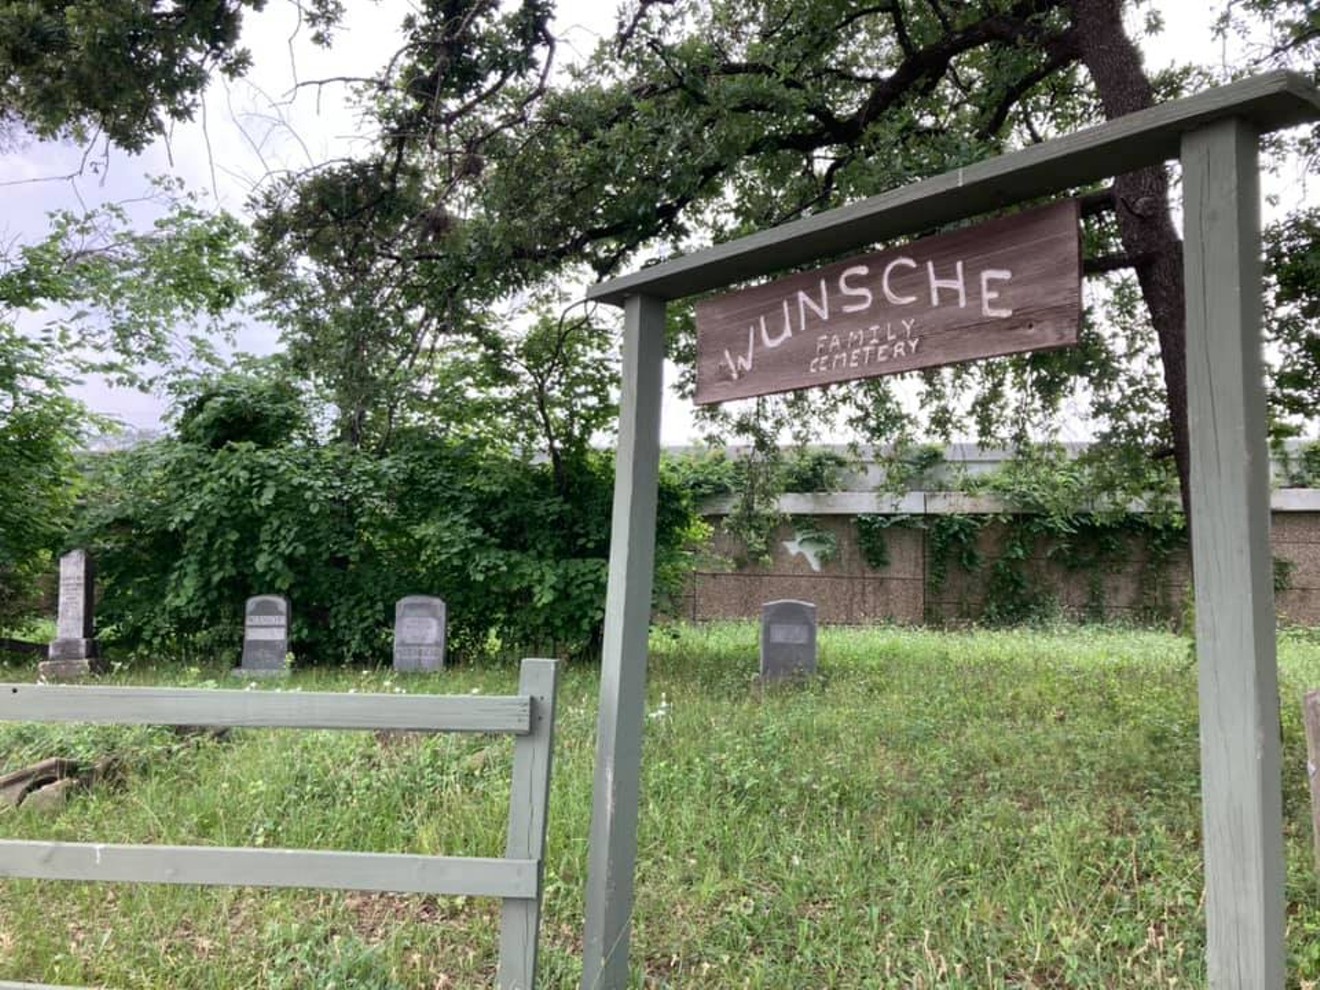 The entrance to the Wunsche Family Cemetery on the I-45 feeder